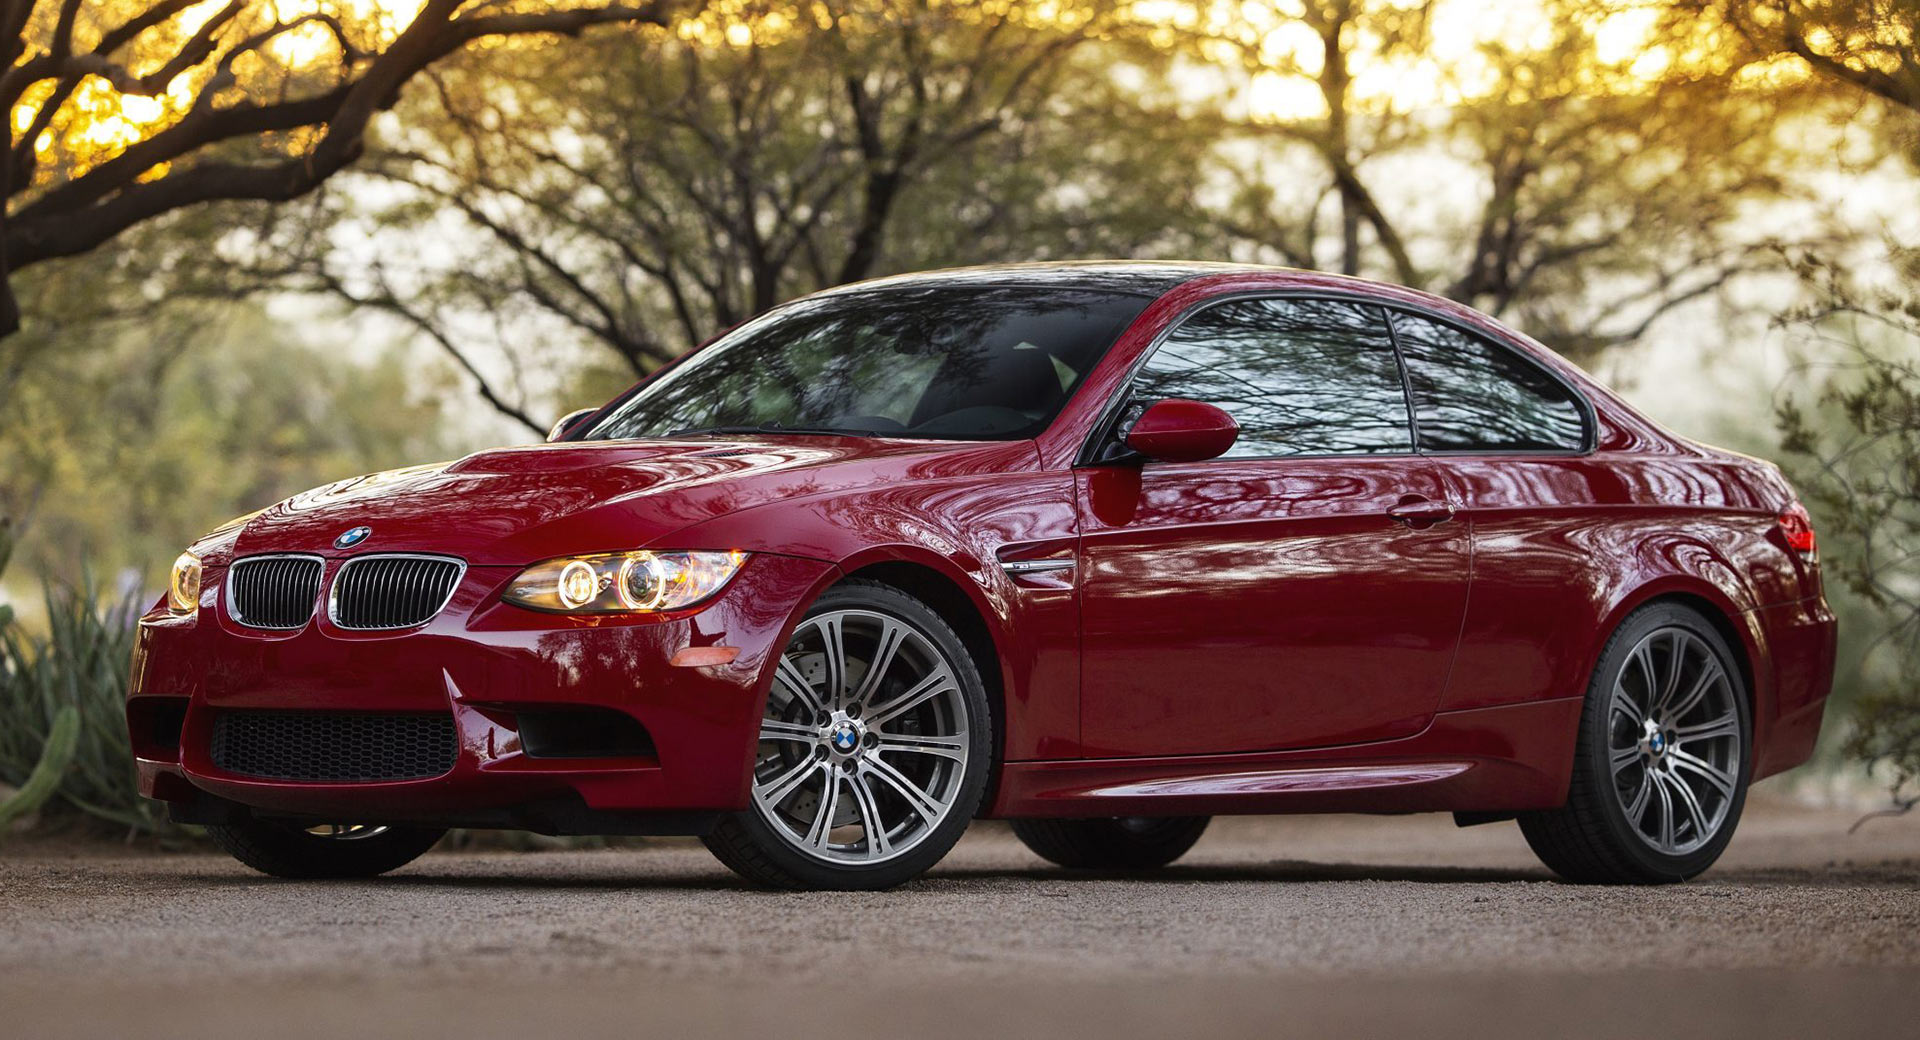 Mod rygrad have på Can't Stand The New M3? Then Take A Look At This 2008 E92 | Carscoops